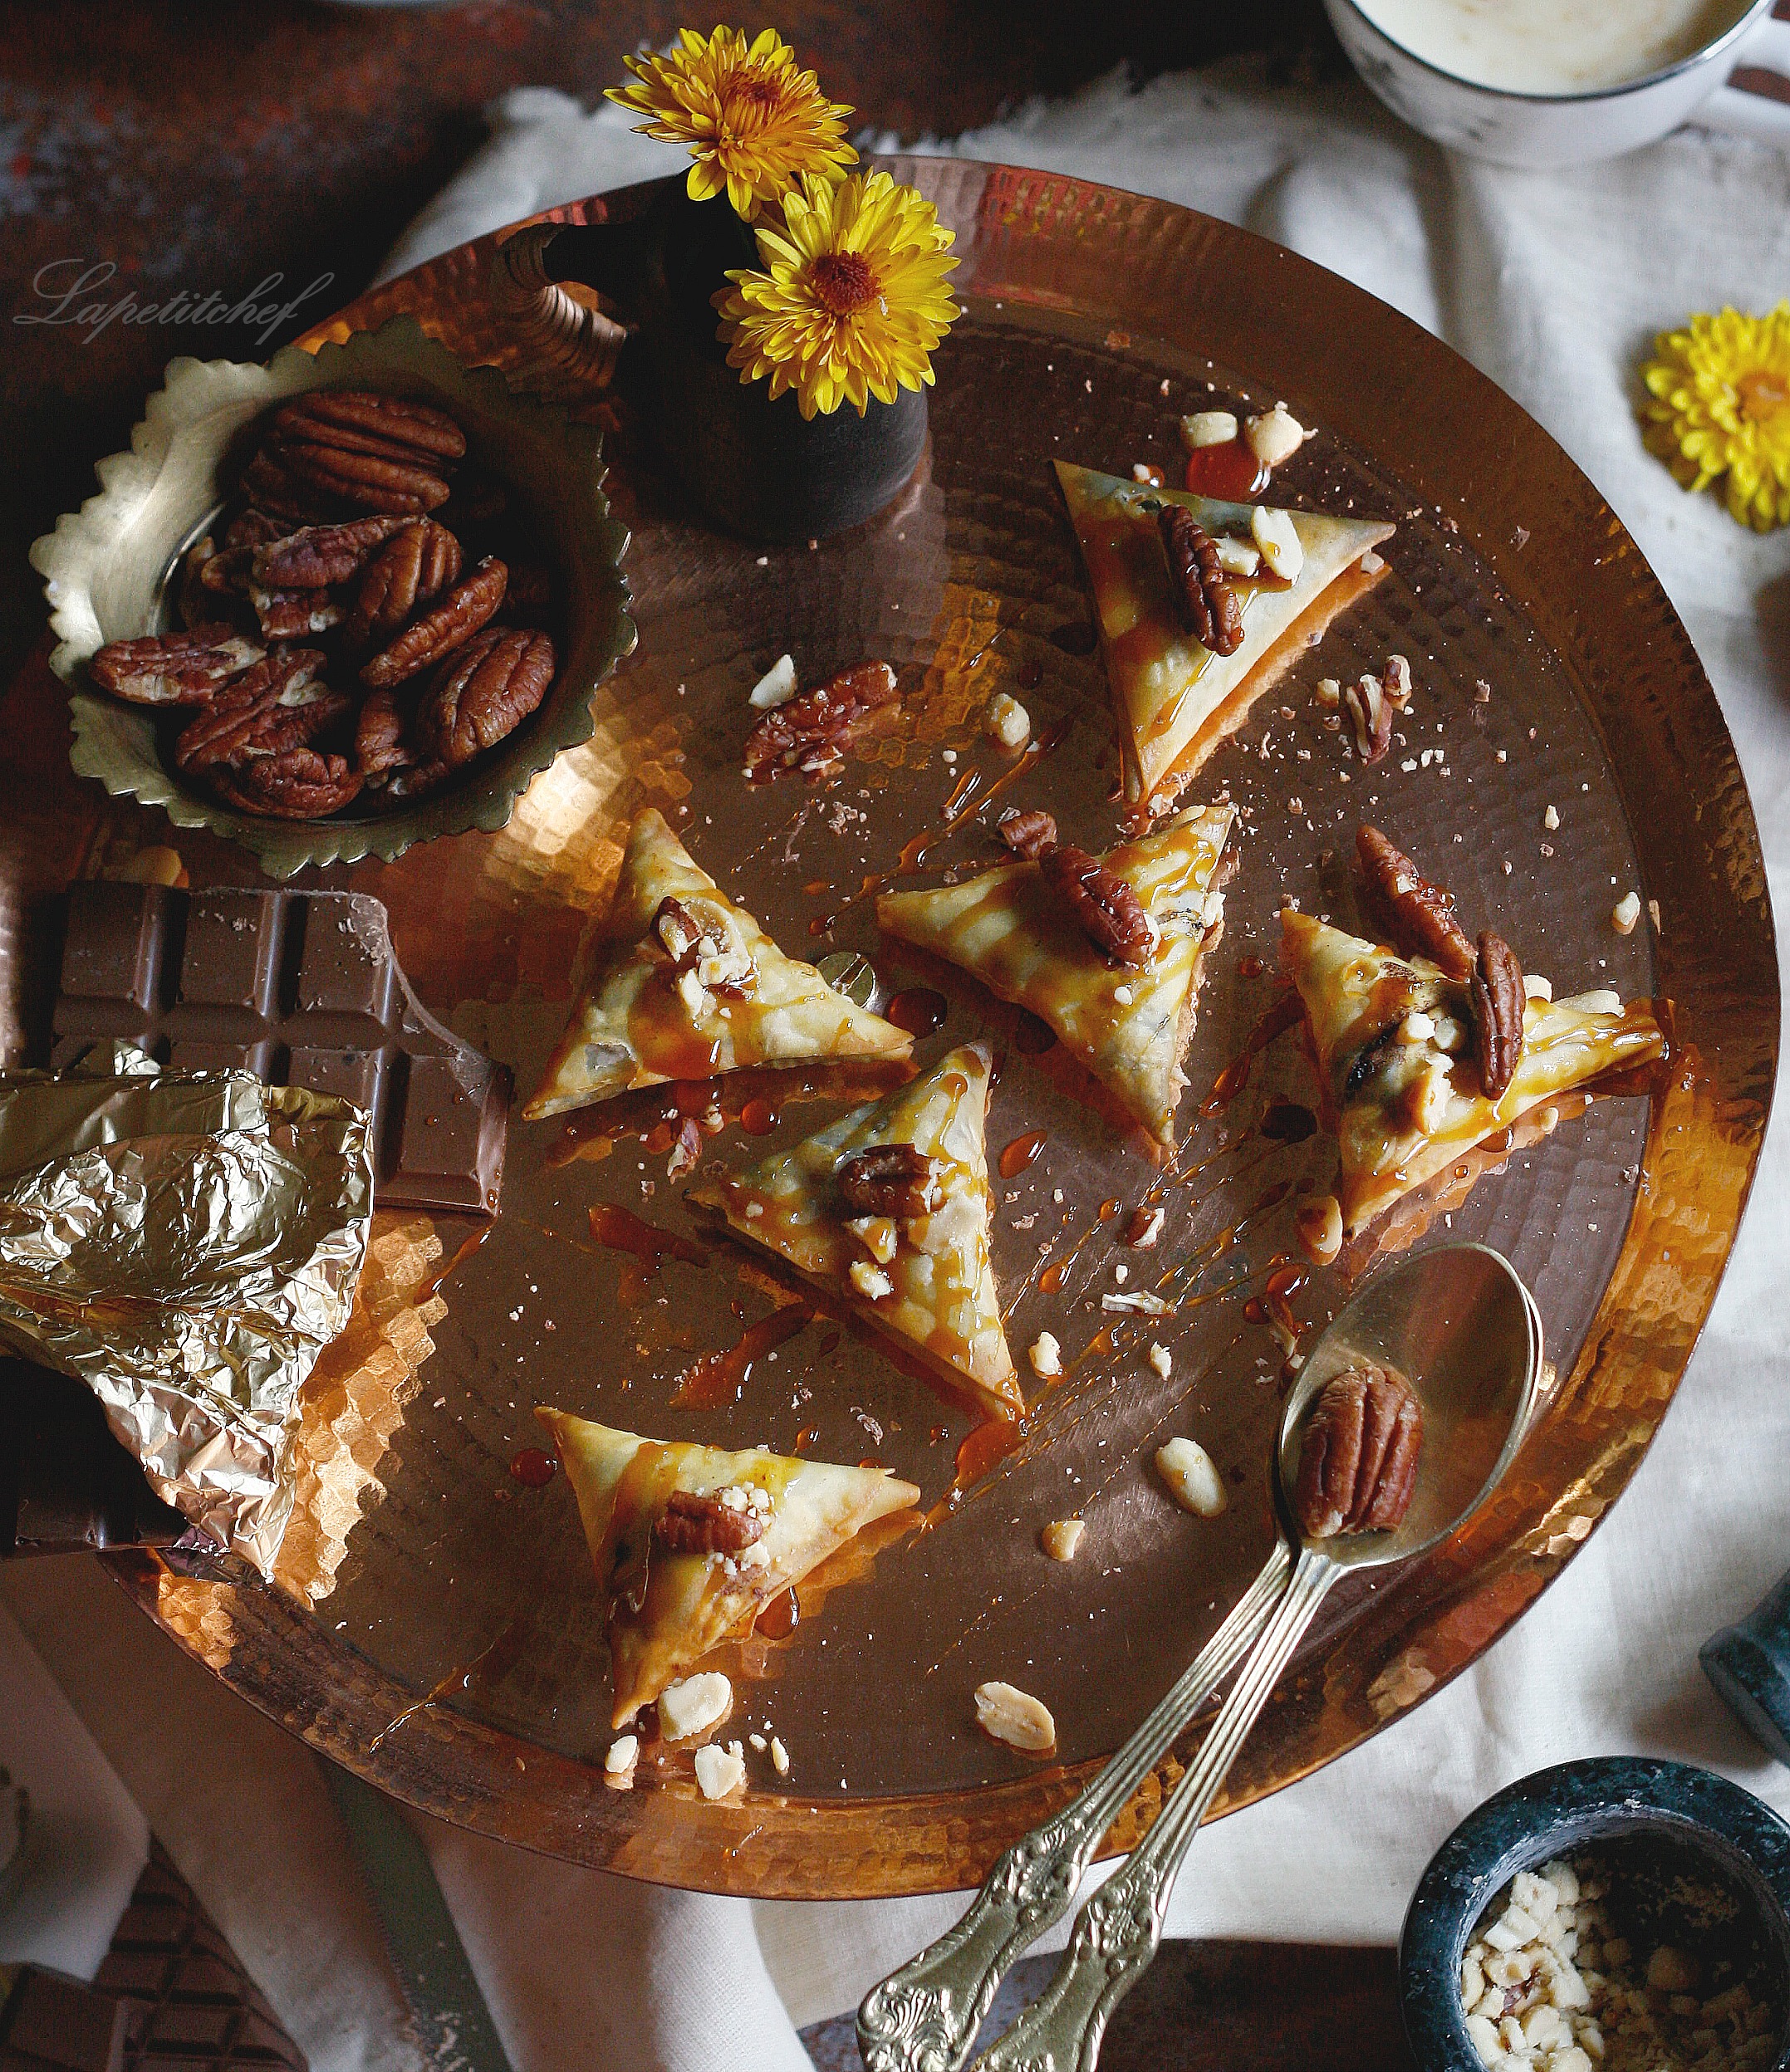 Chocolate samosa with salted caramel and pecans